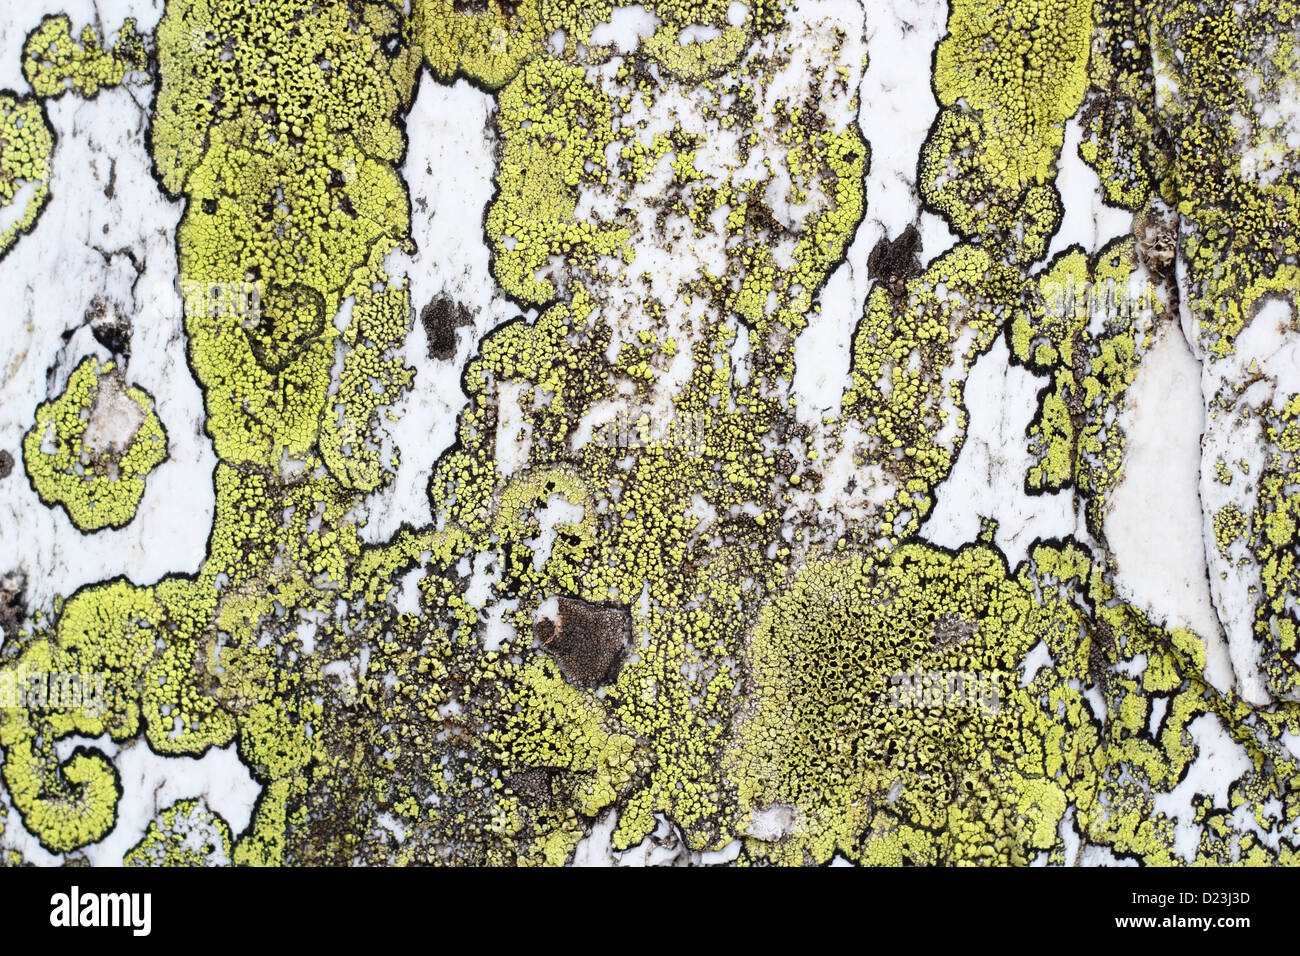 detail of green moss on a white stone Stock Photo